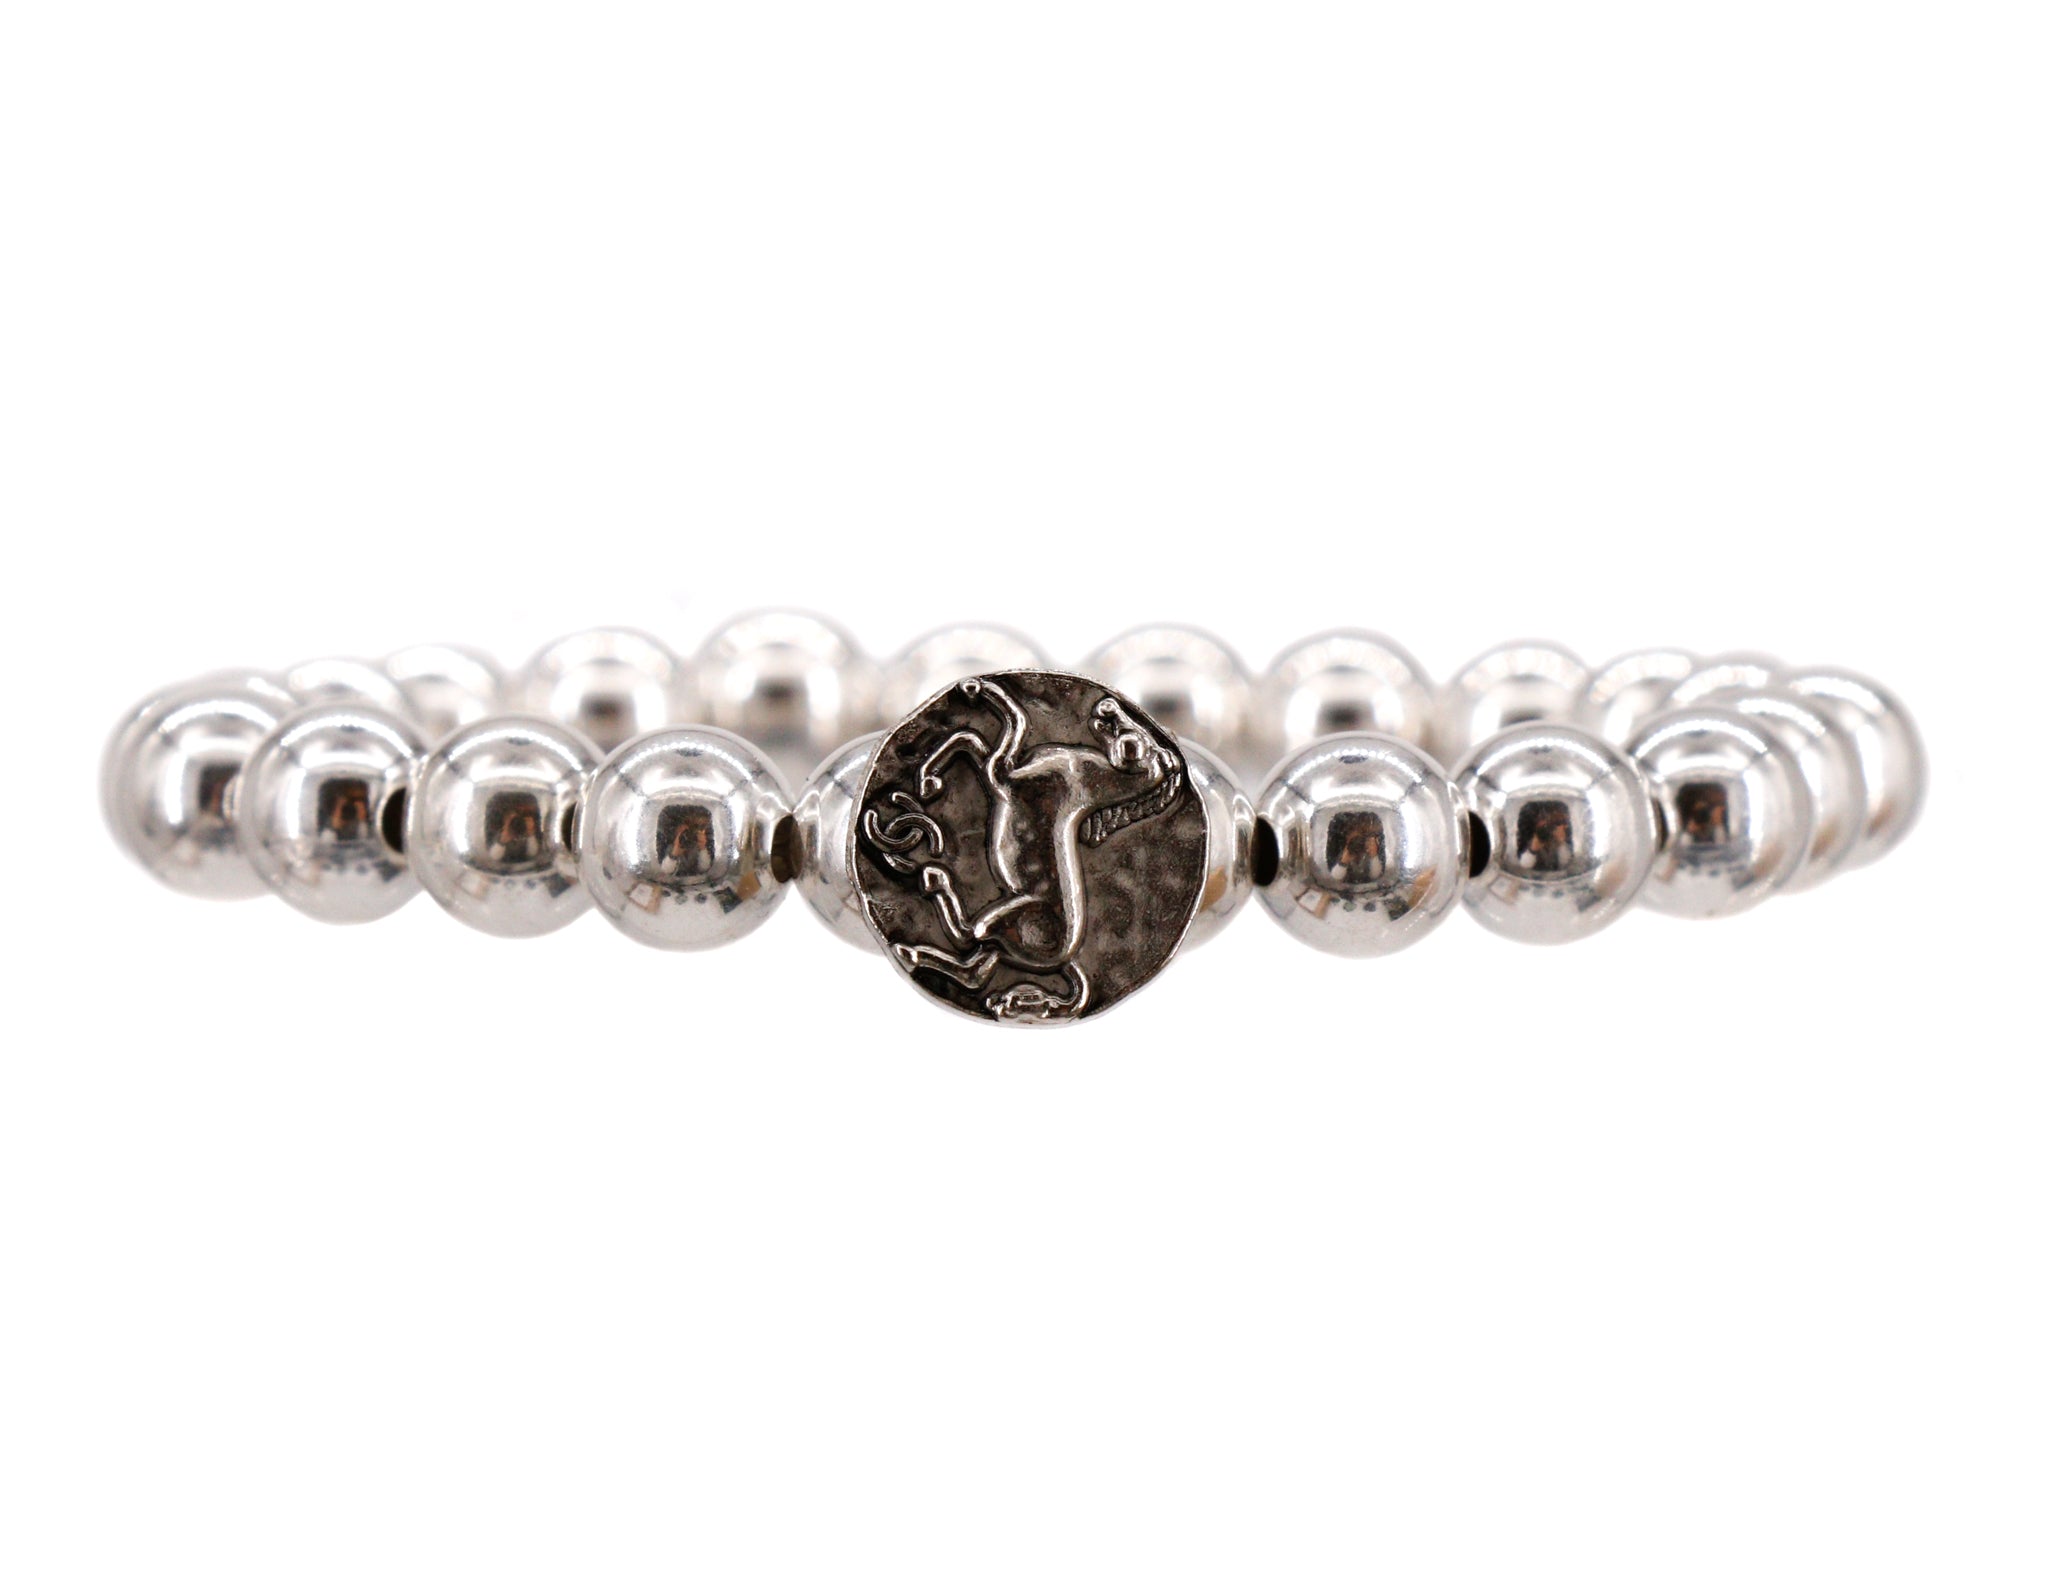 Sterling silver bracelet with a repurposed designer horse button